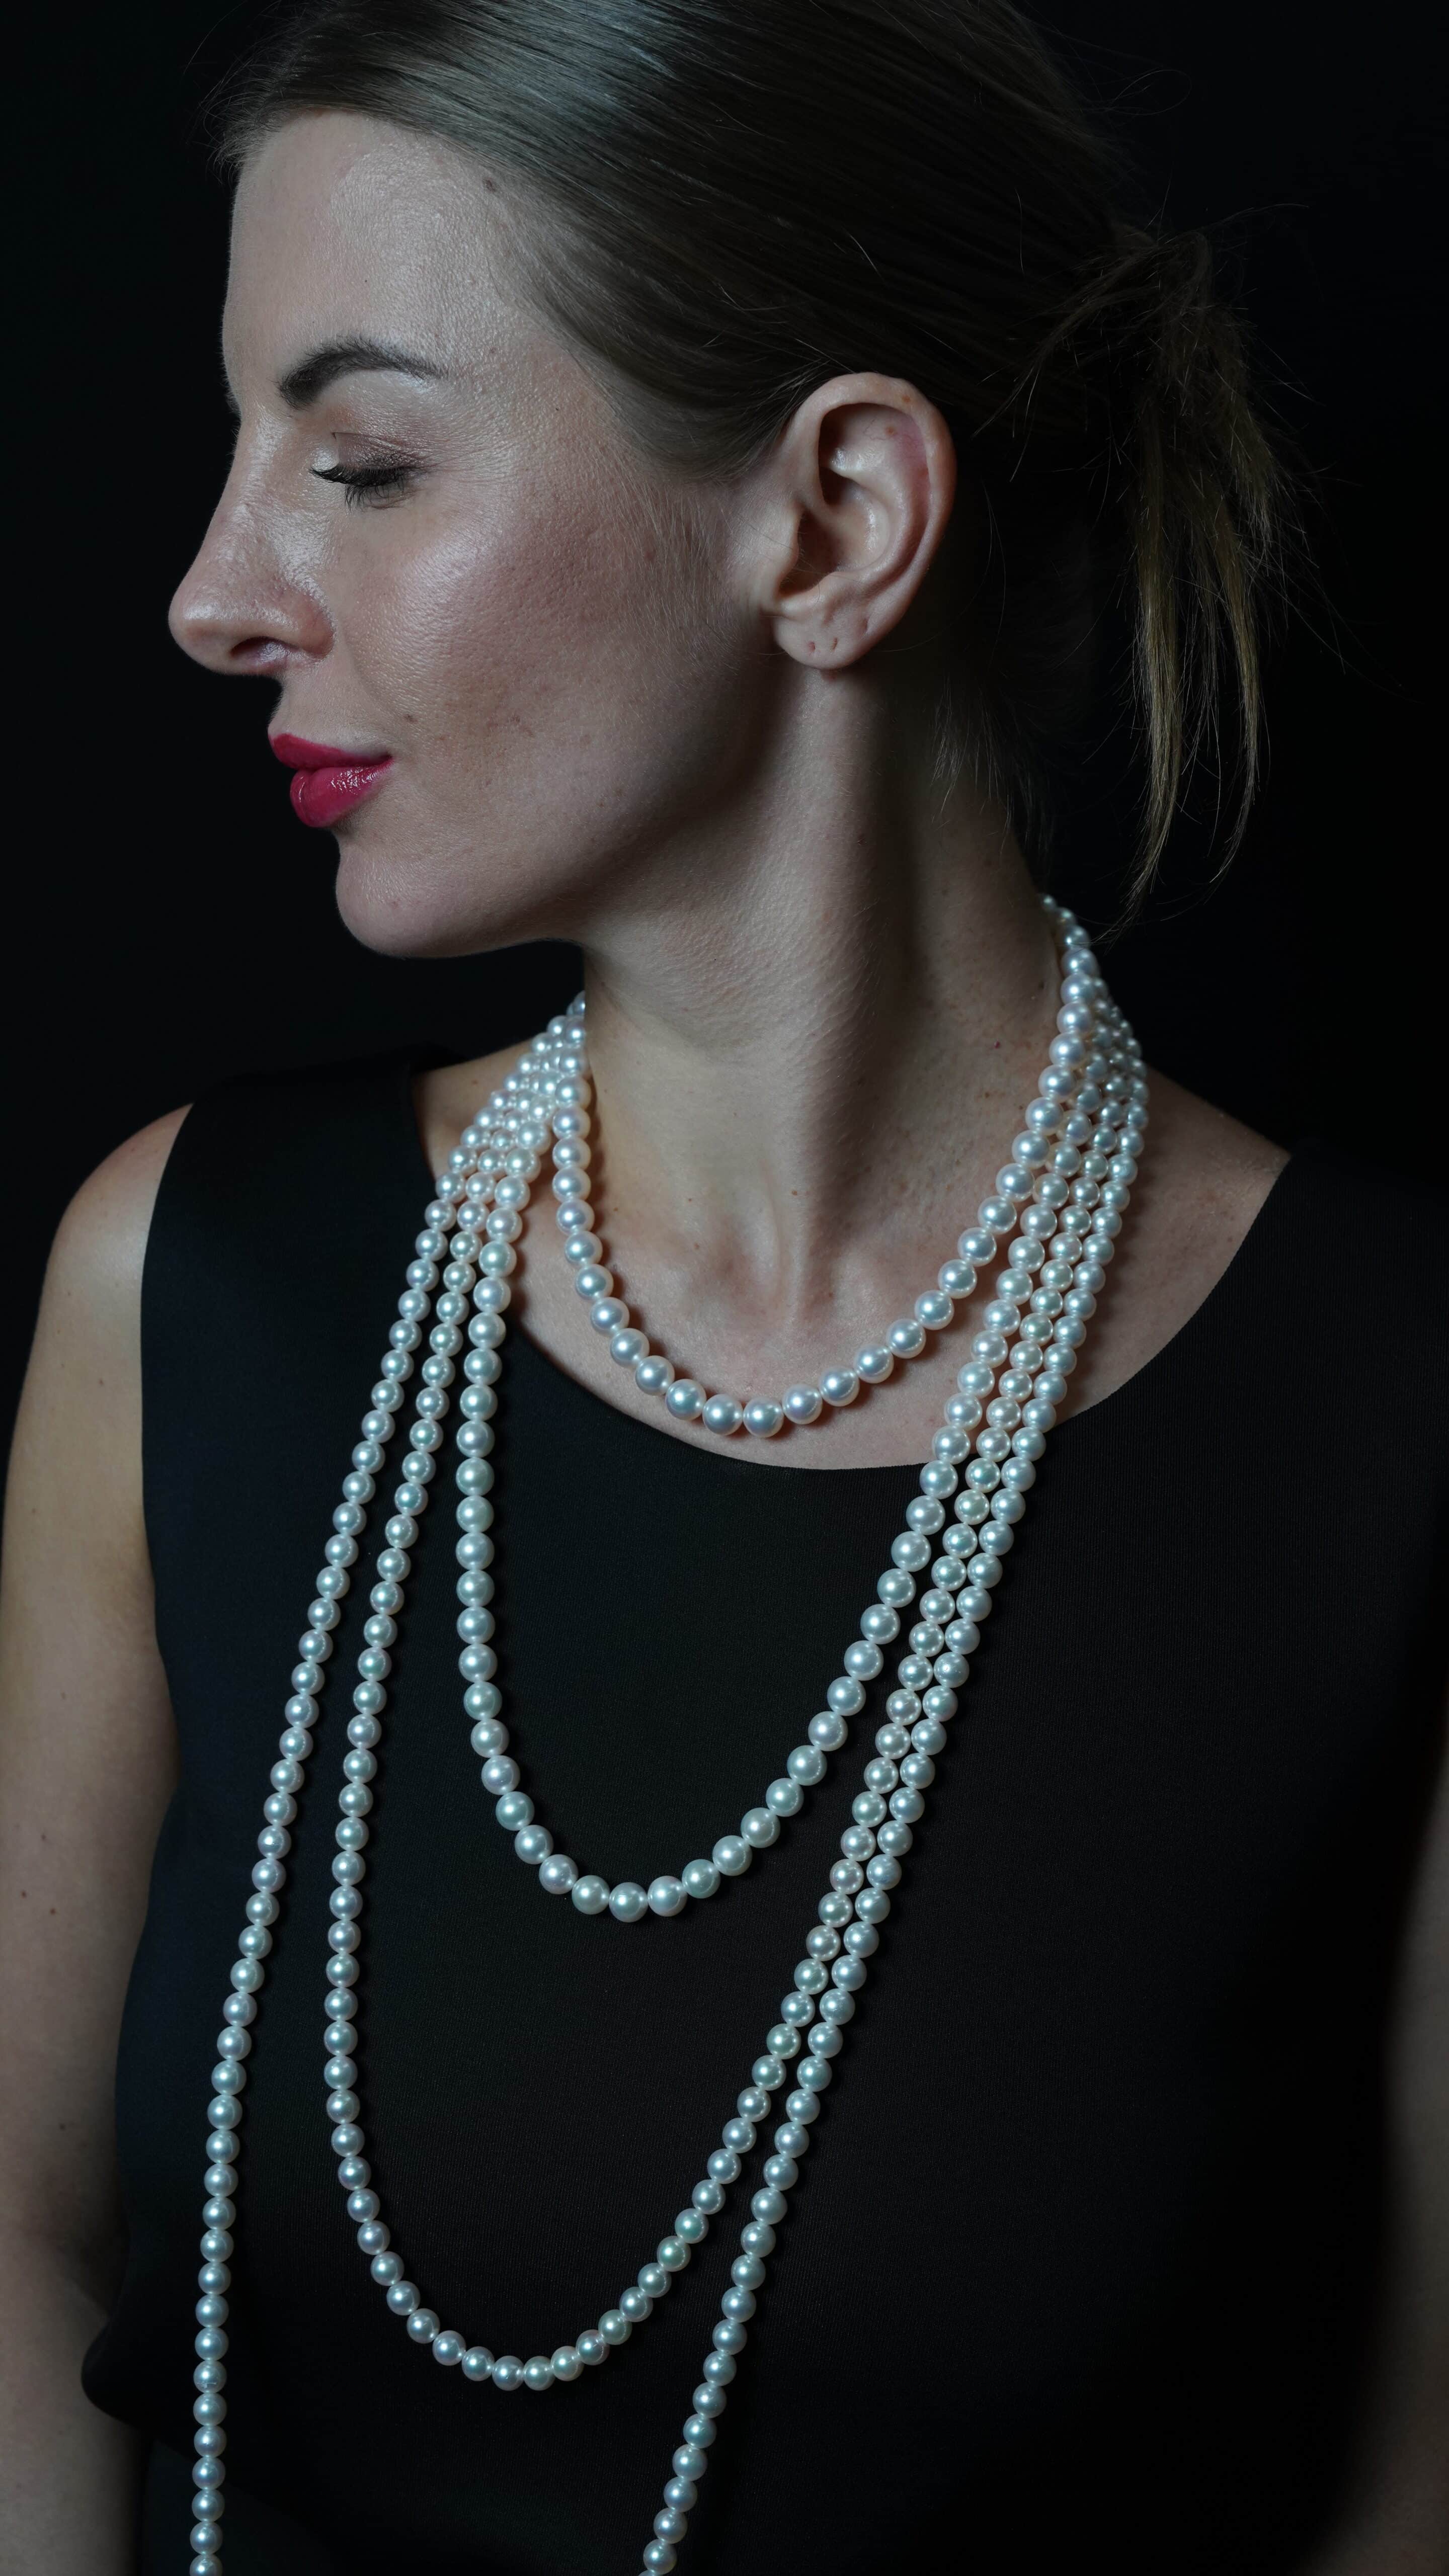 Why Pearls Are Making A Comeback In 2023